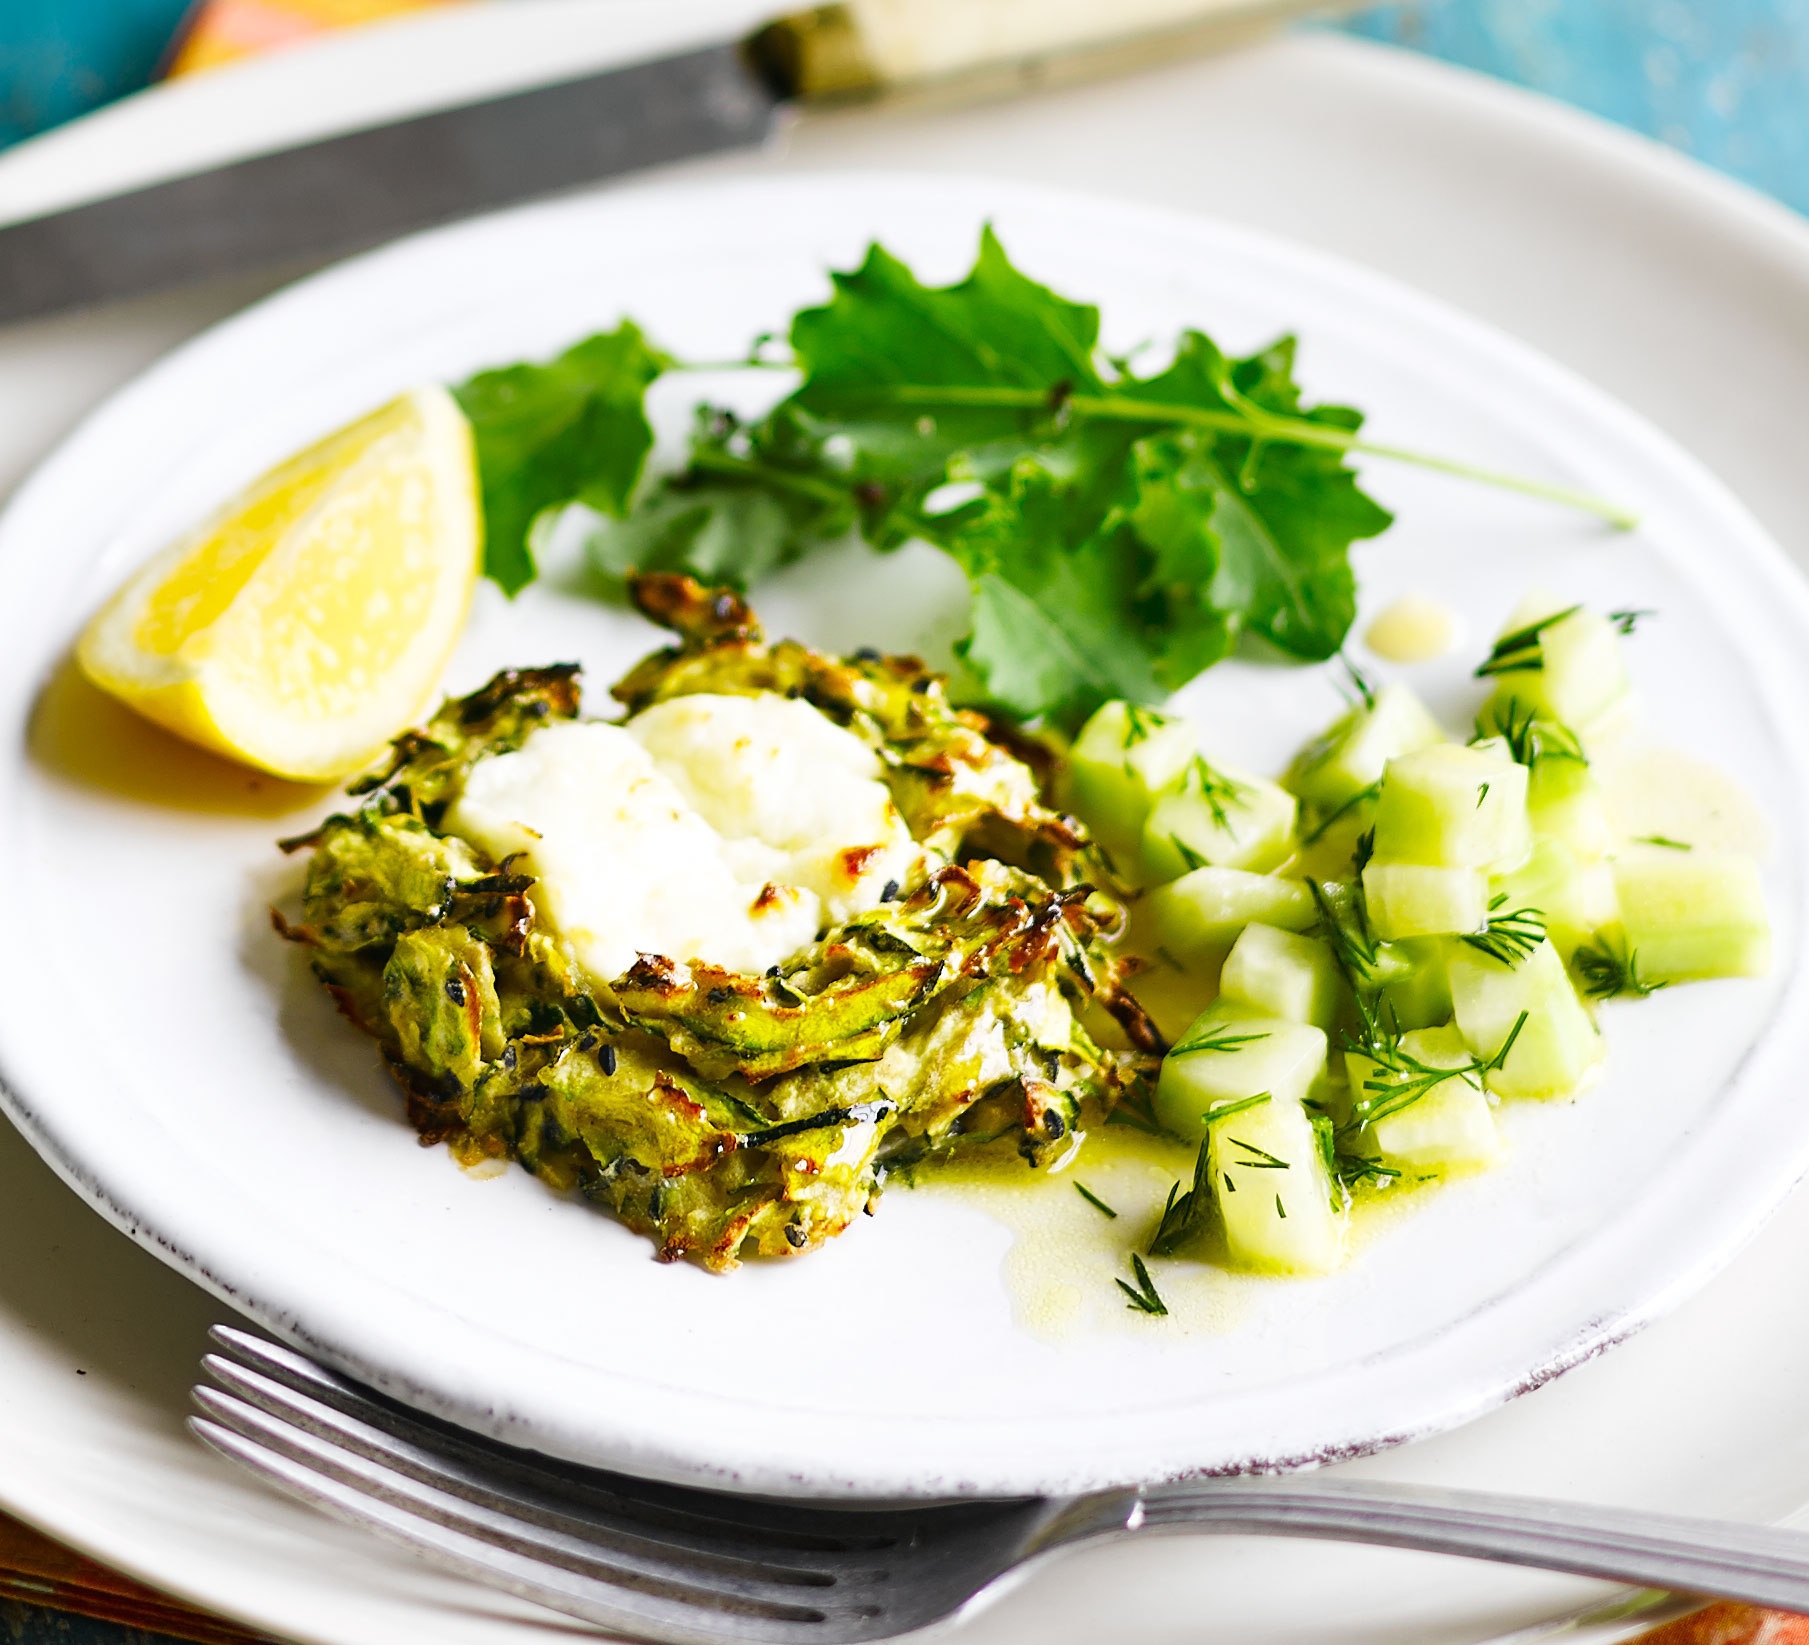 Courgette fritters with dill & cucumber sauce